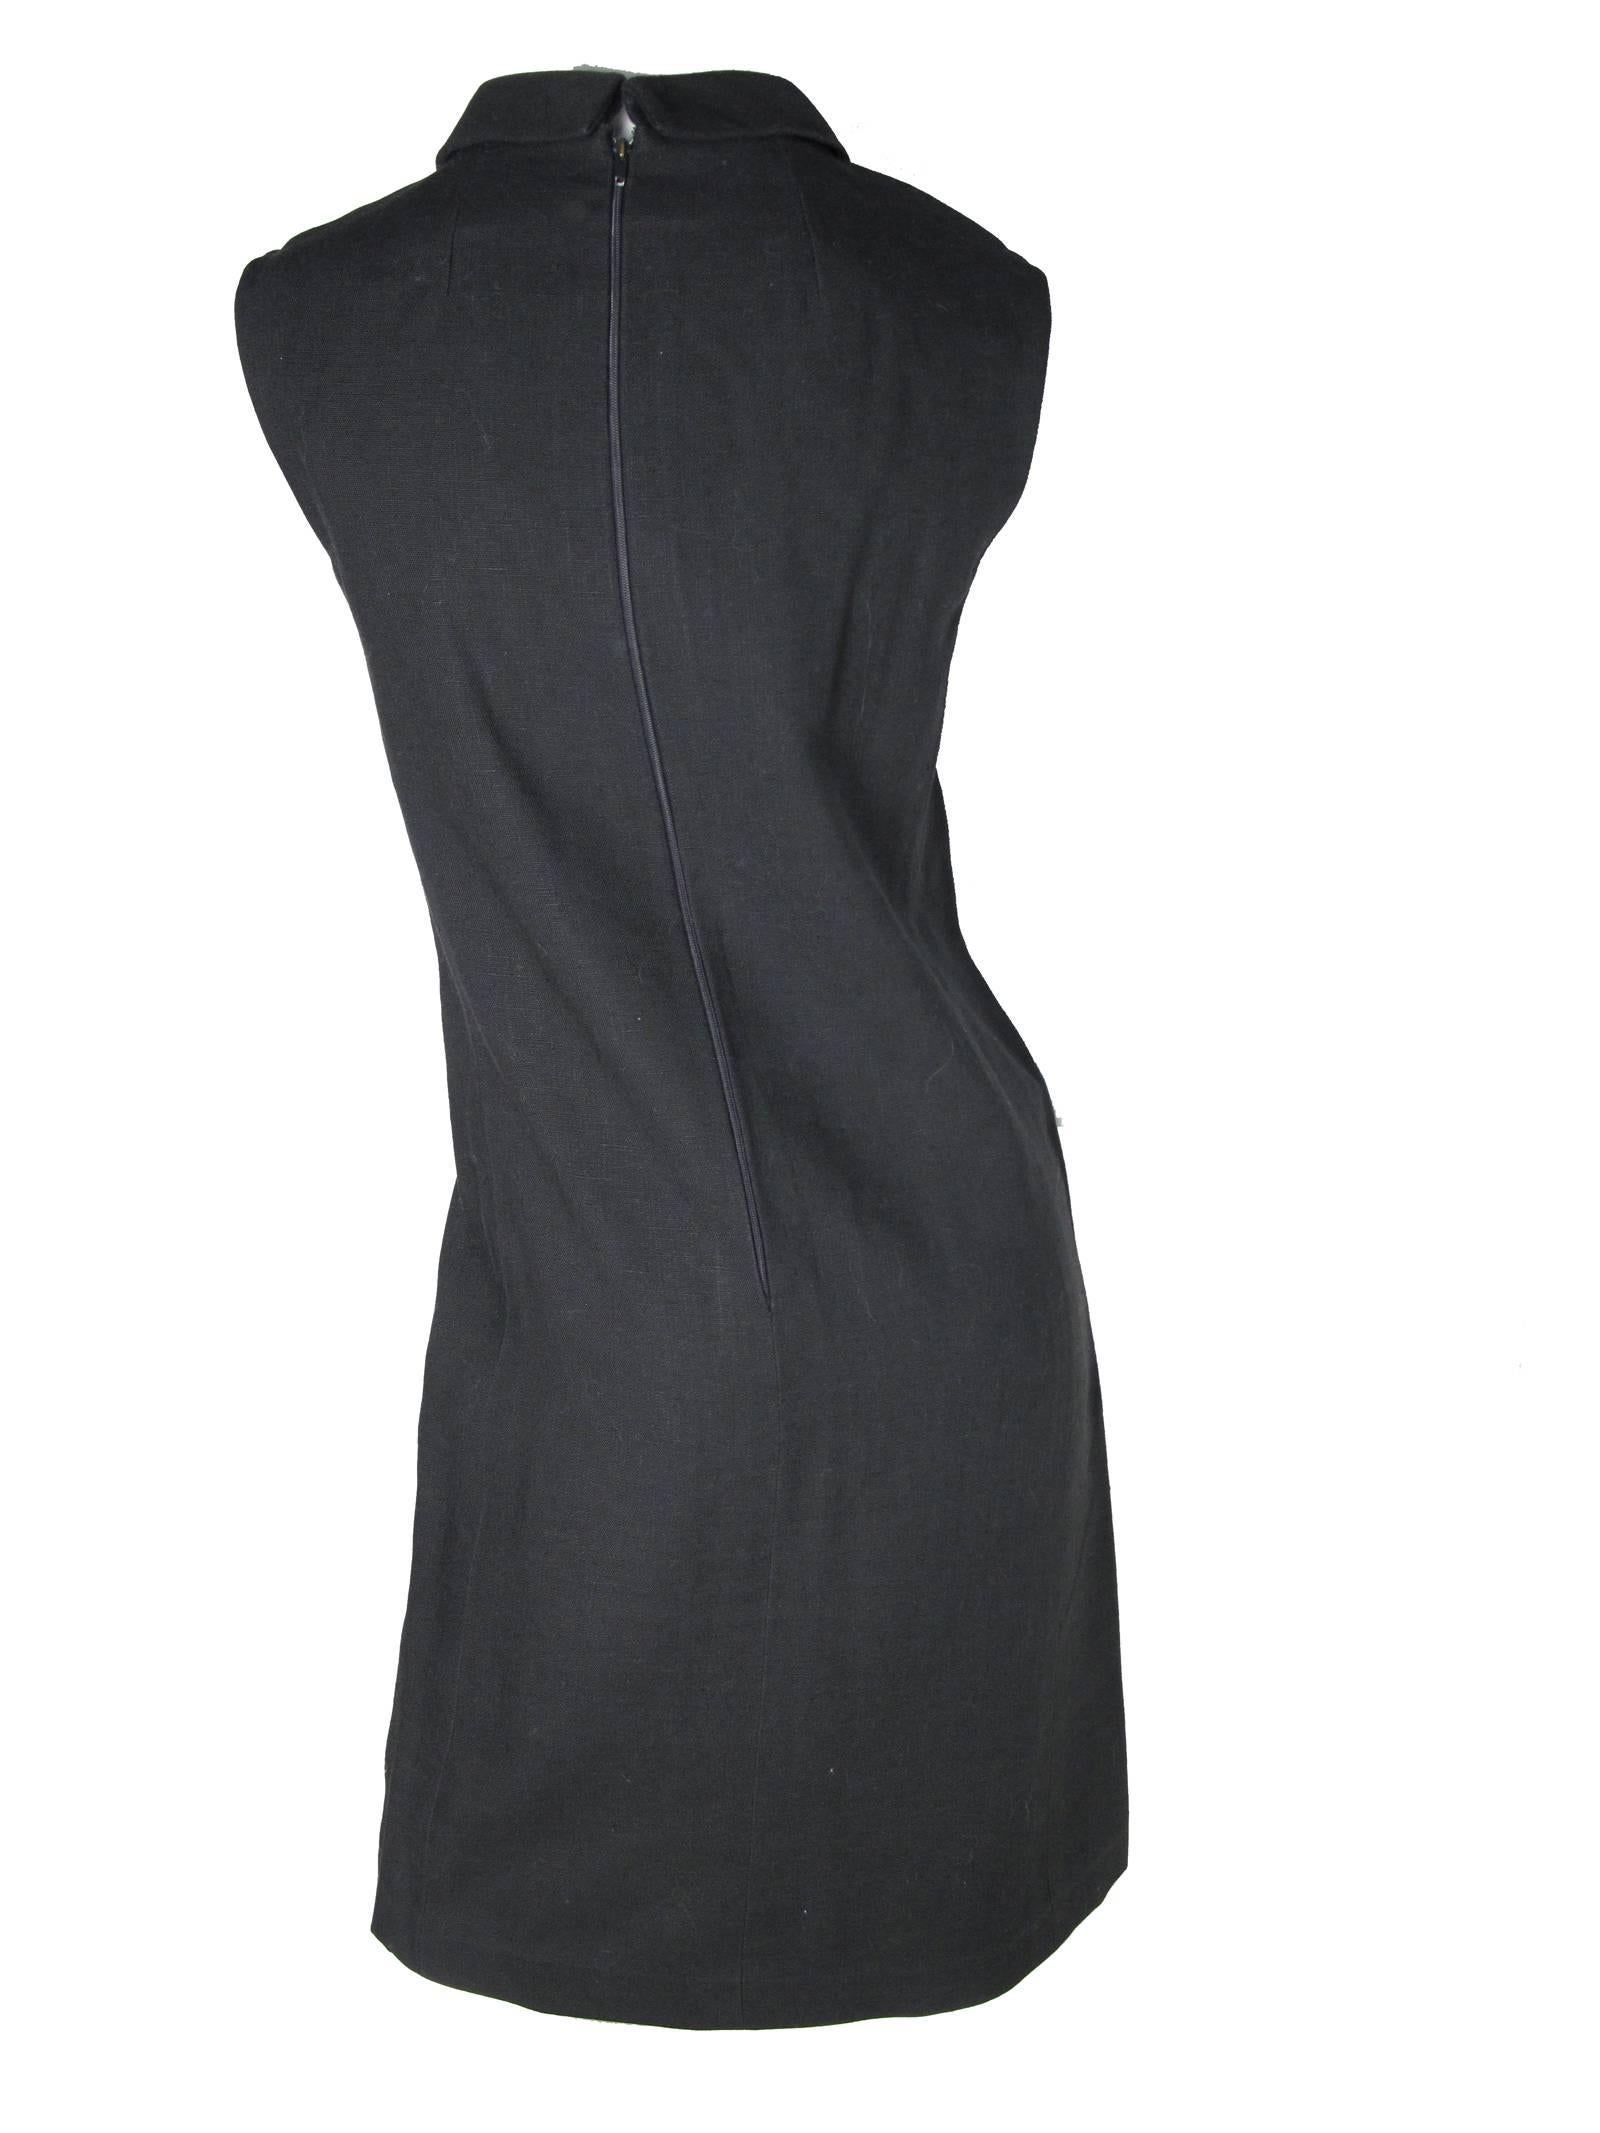 1960s Geoffrey Beene double breasted black linen dress with front pockets. Condition: Excellent. Size Med
34" bust, 33" waist, 36" hips, 39.5" length. 
We accept returns for refund, please see our terms.  We offer free ground